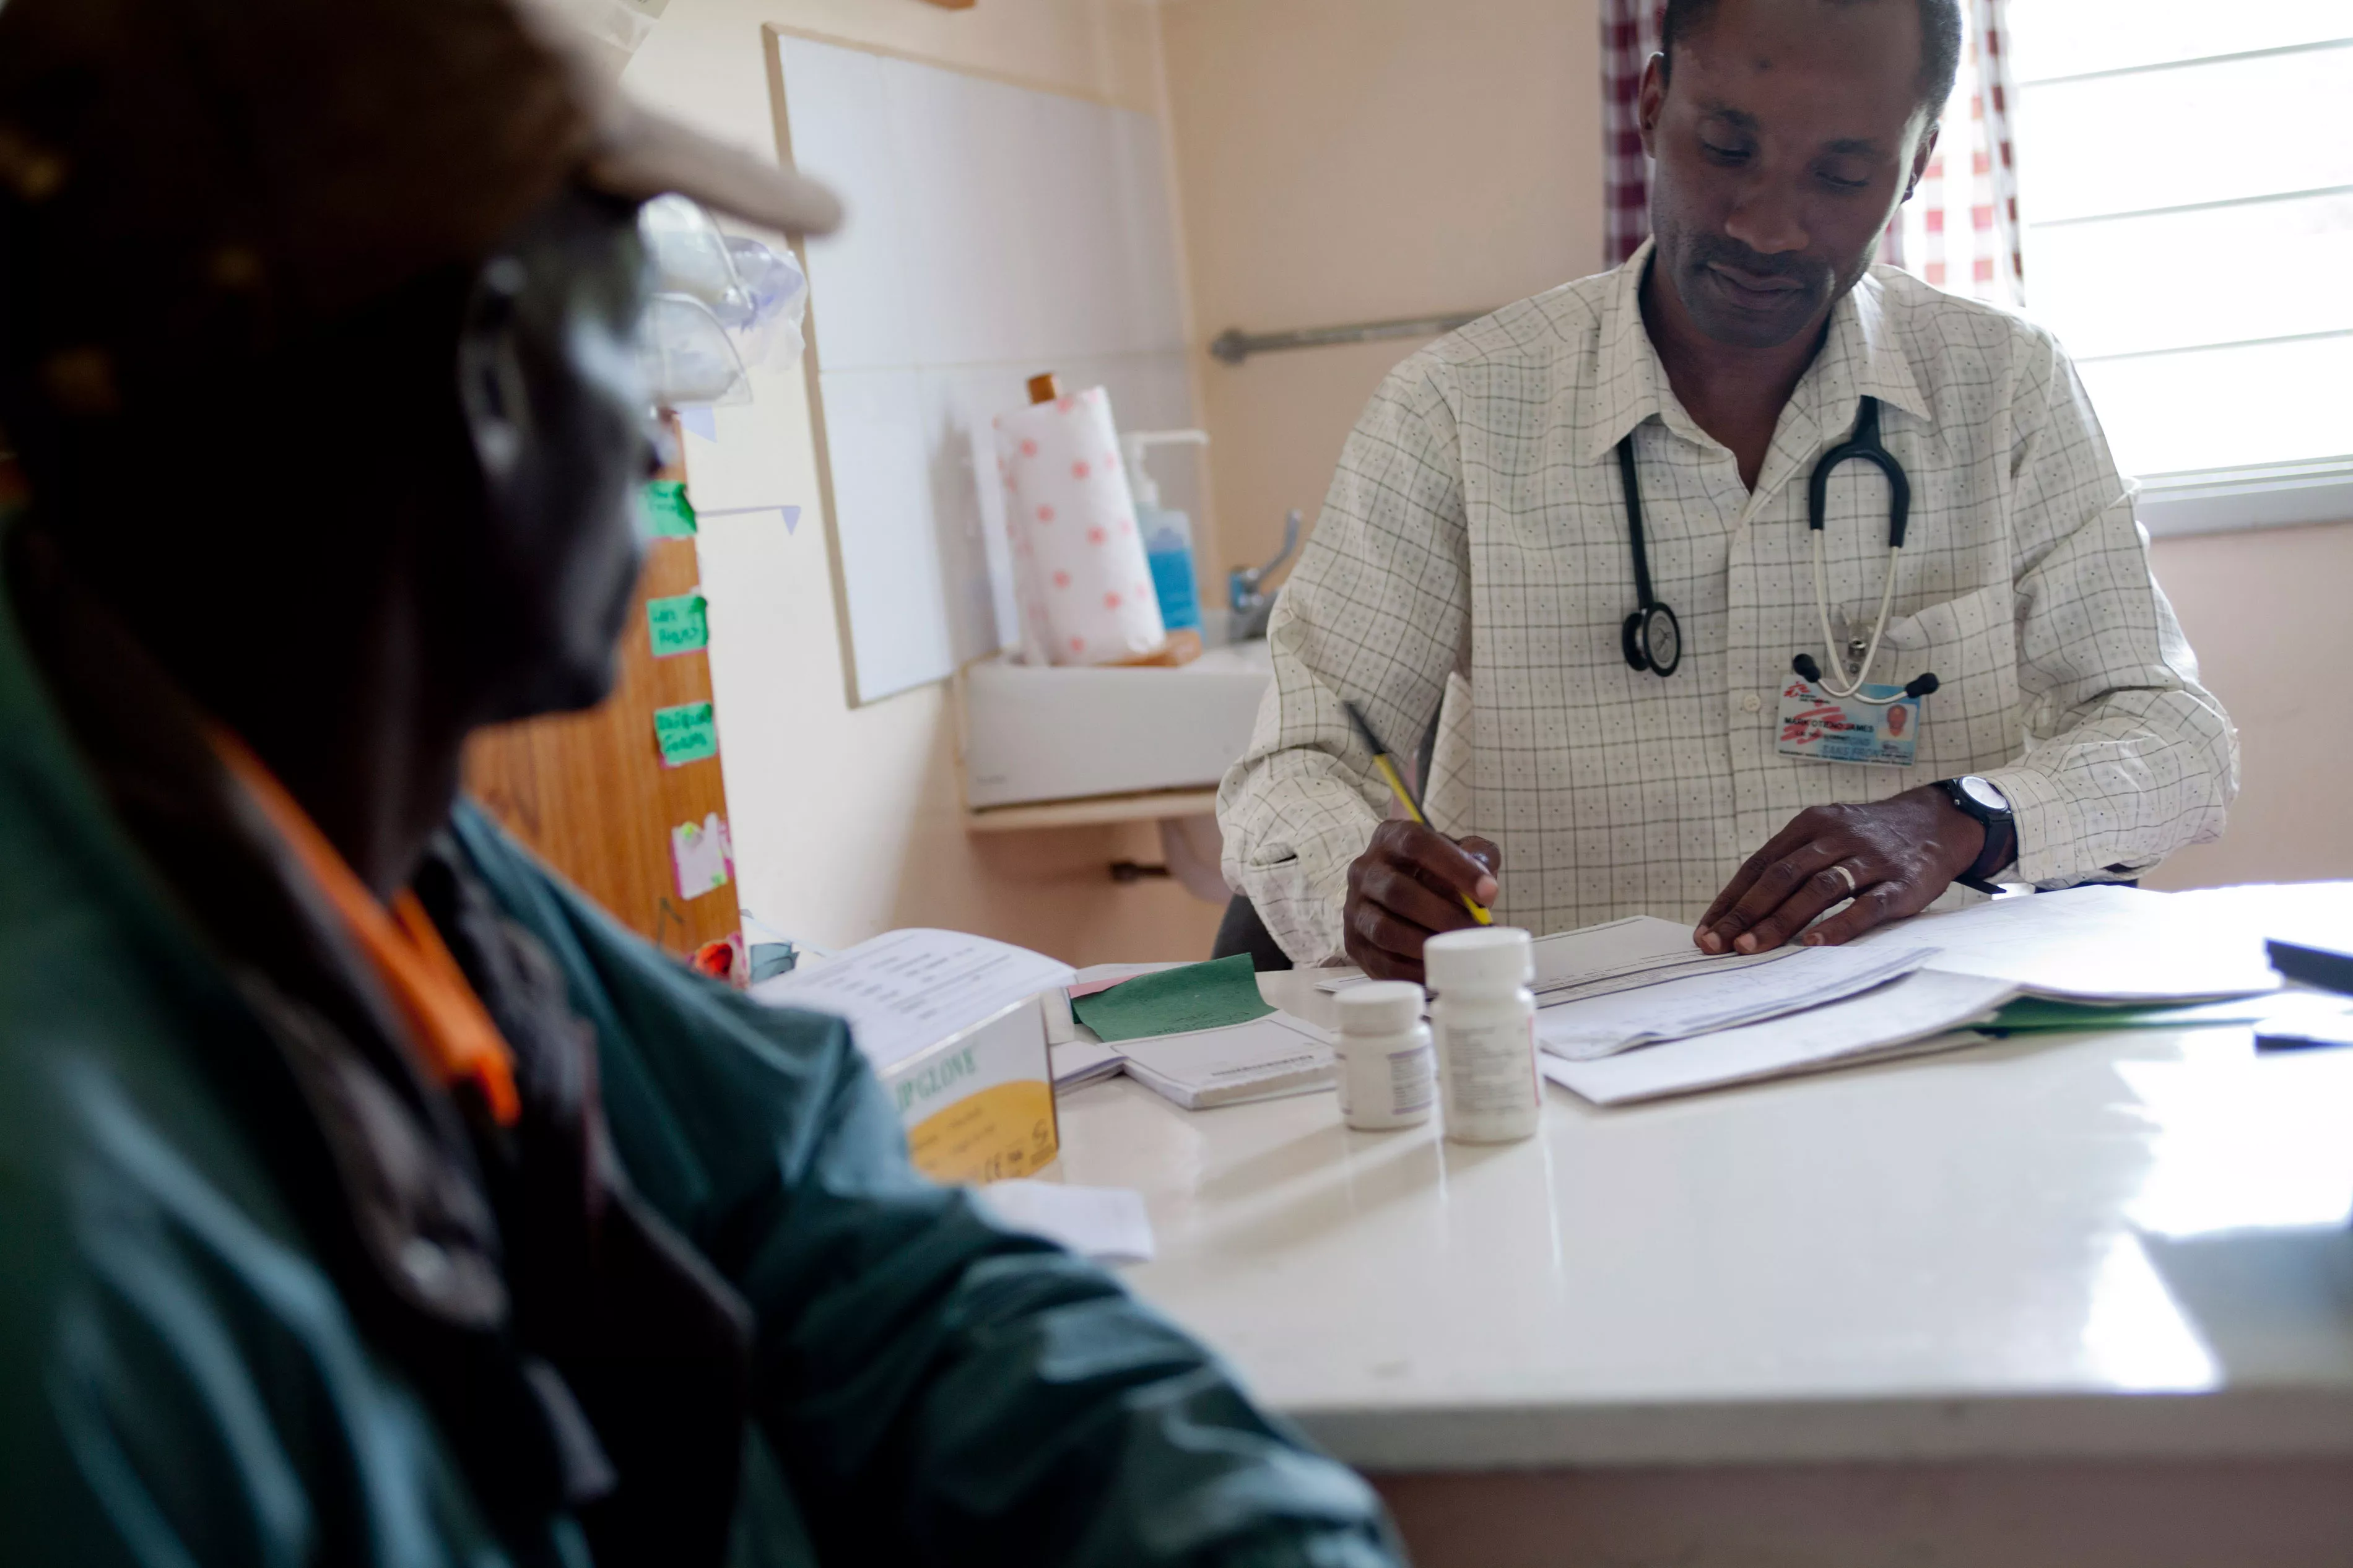 MSF treats more than 200,000 people worldwide for HIV and 97 percent of the antiretrovirals are quality, affordable generics from India. Here, an MSF doctor in Kenya consults one MSF’s thousands of HIV+ patients under treatment. 